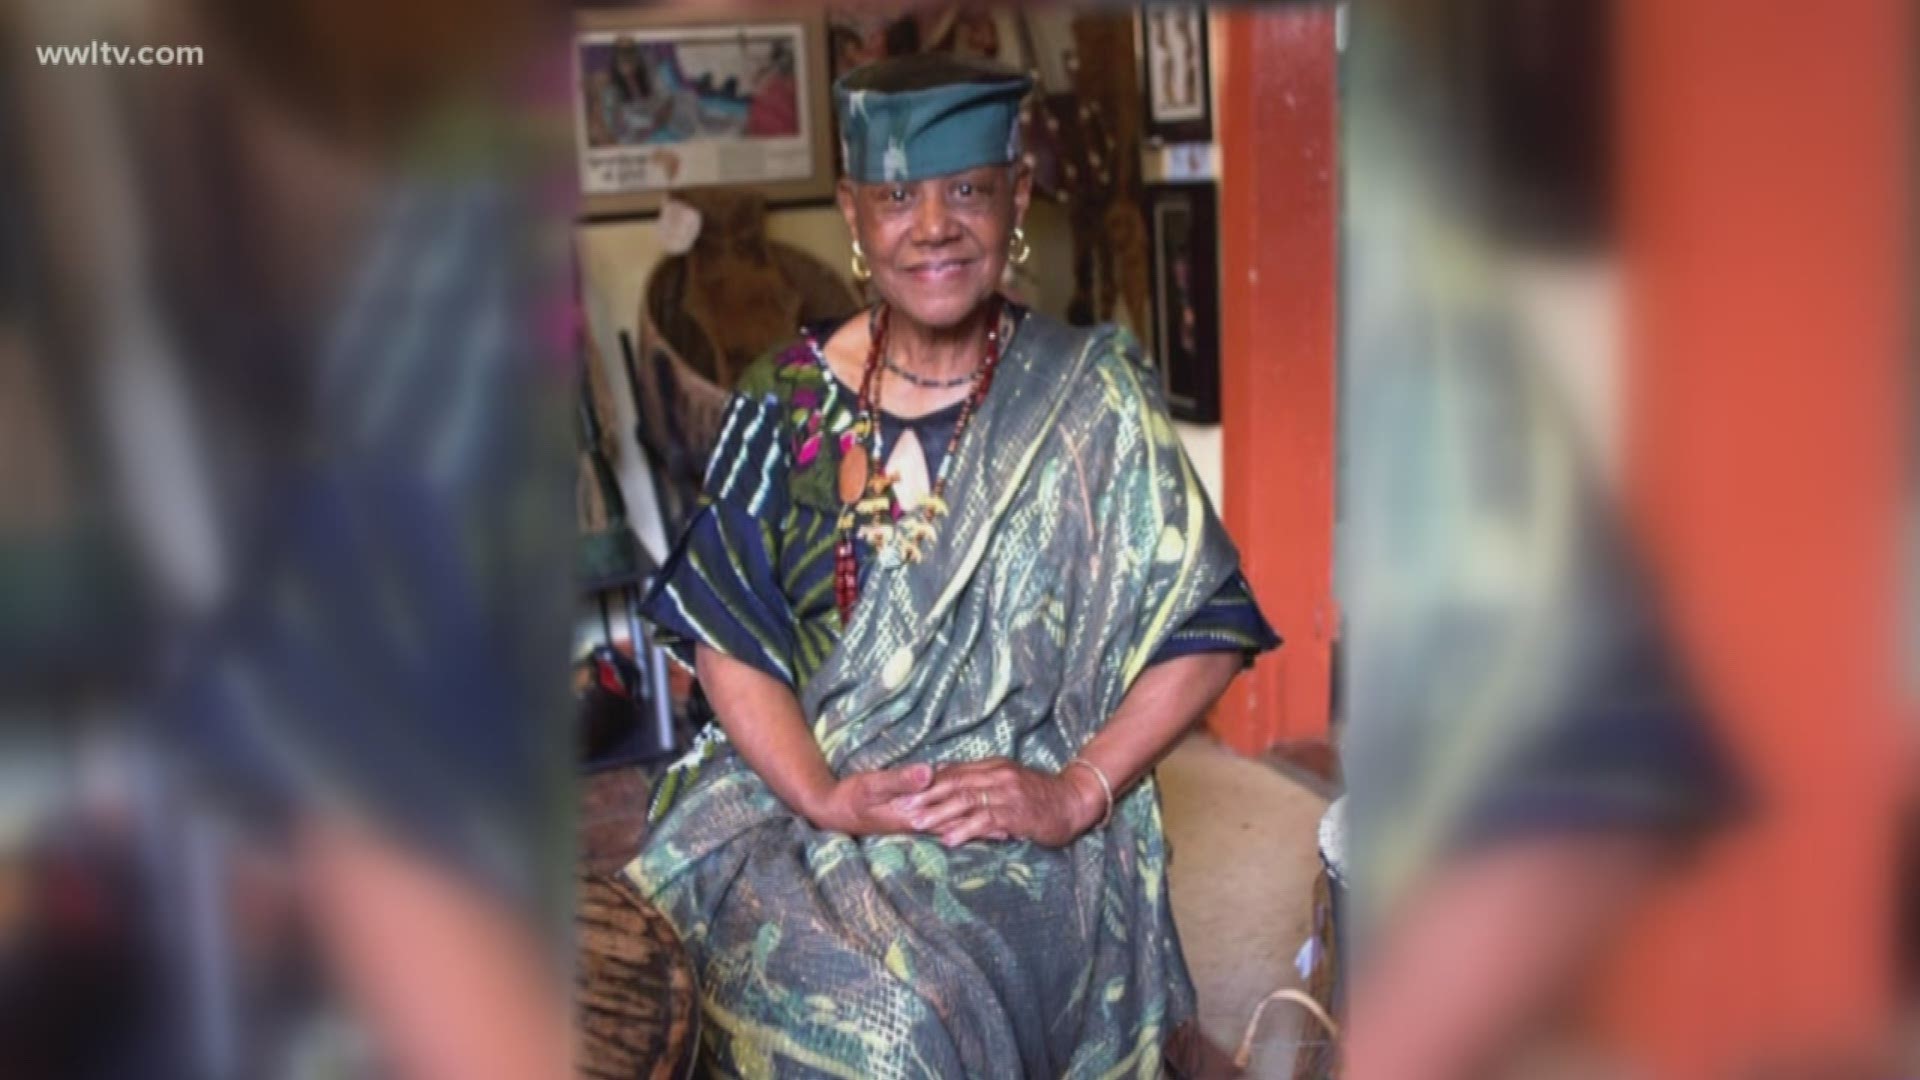 She was loved by Baton Rouge. On Tuesday night, people came out and showed that love for Sadie Roberts-Joseph.